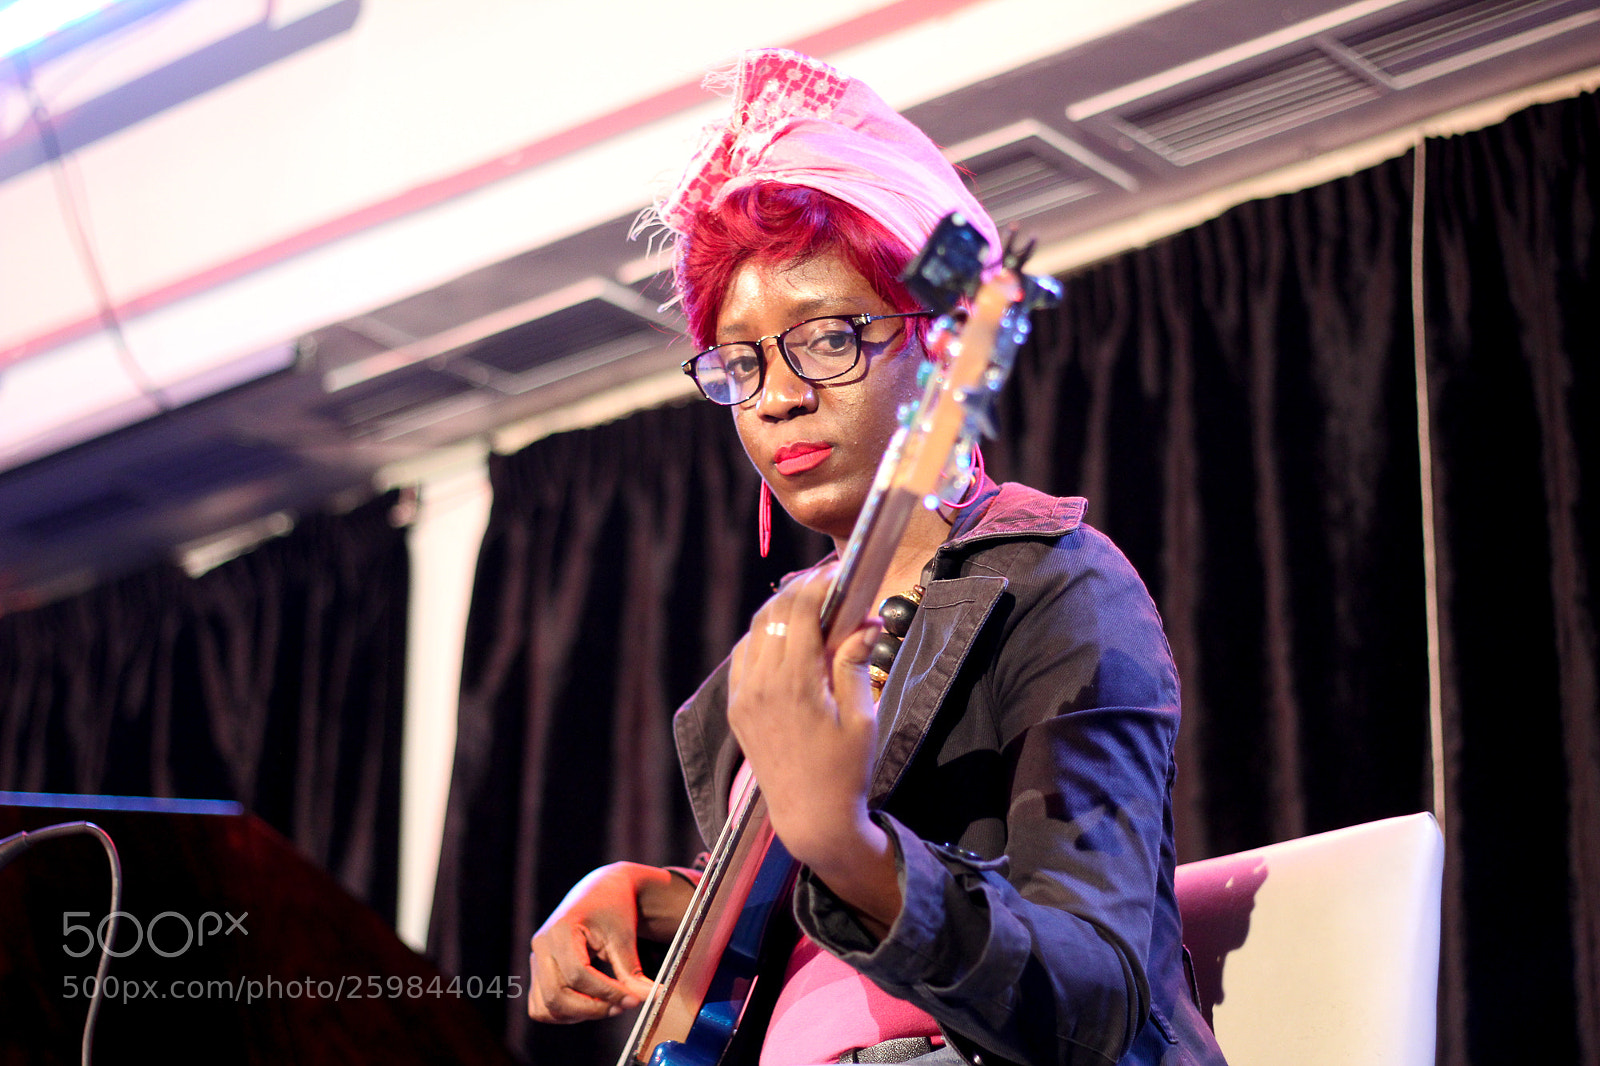 Canon EOS 60D sample photo. Women in music photography